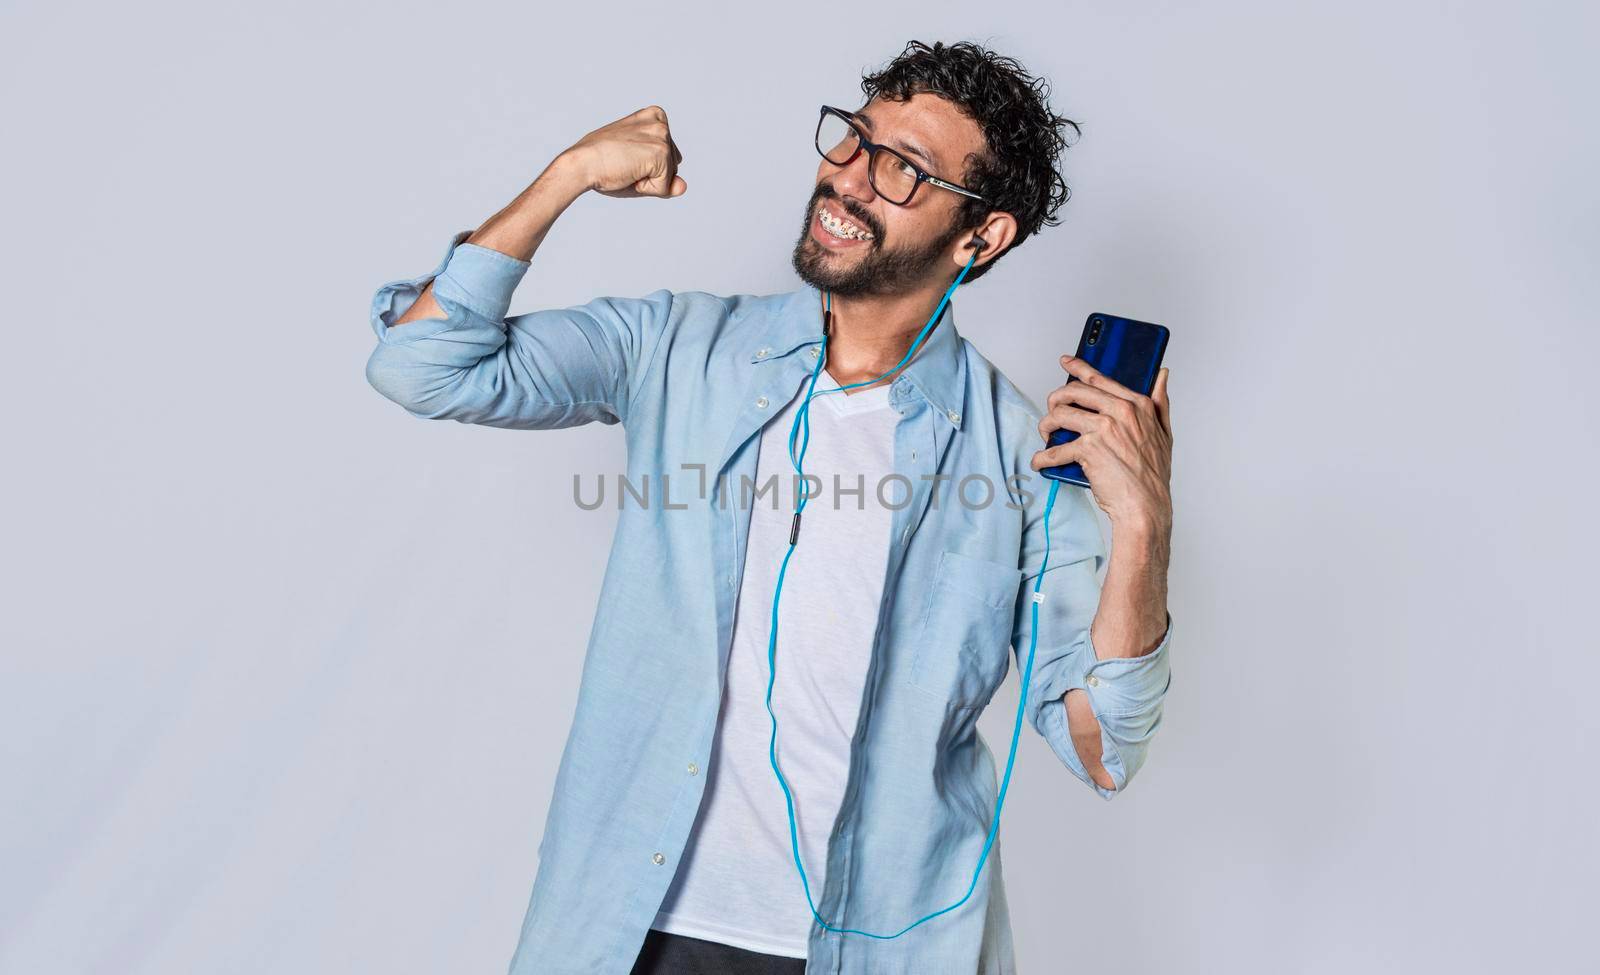 Happy man with headphones holding a cell phone and celebrates, A guy with his smartphone celebrating victory